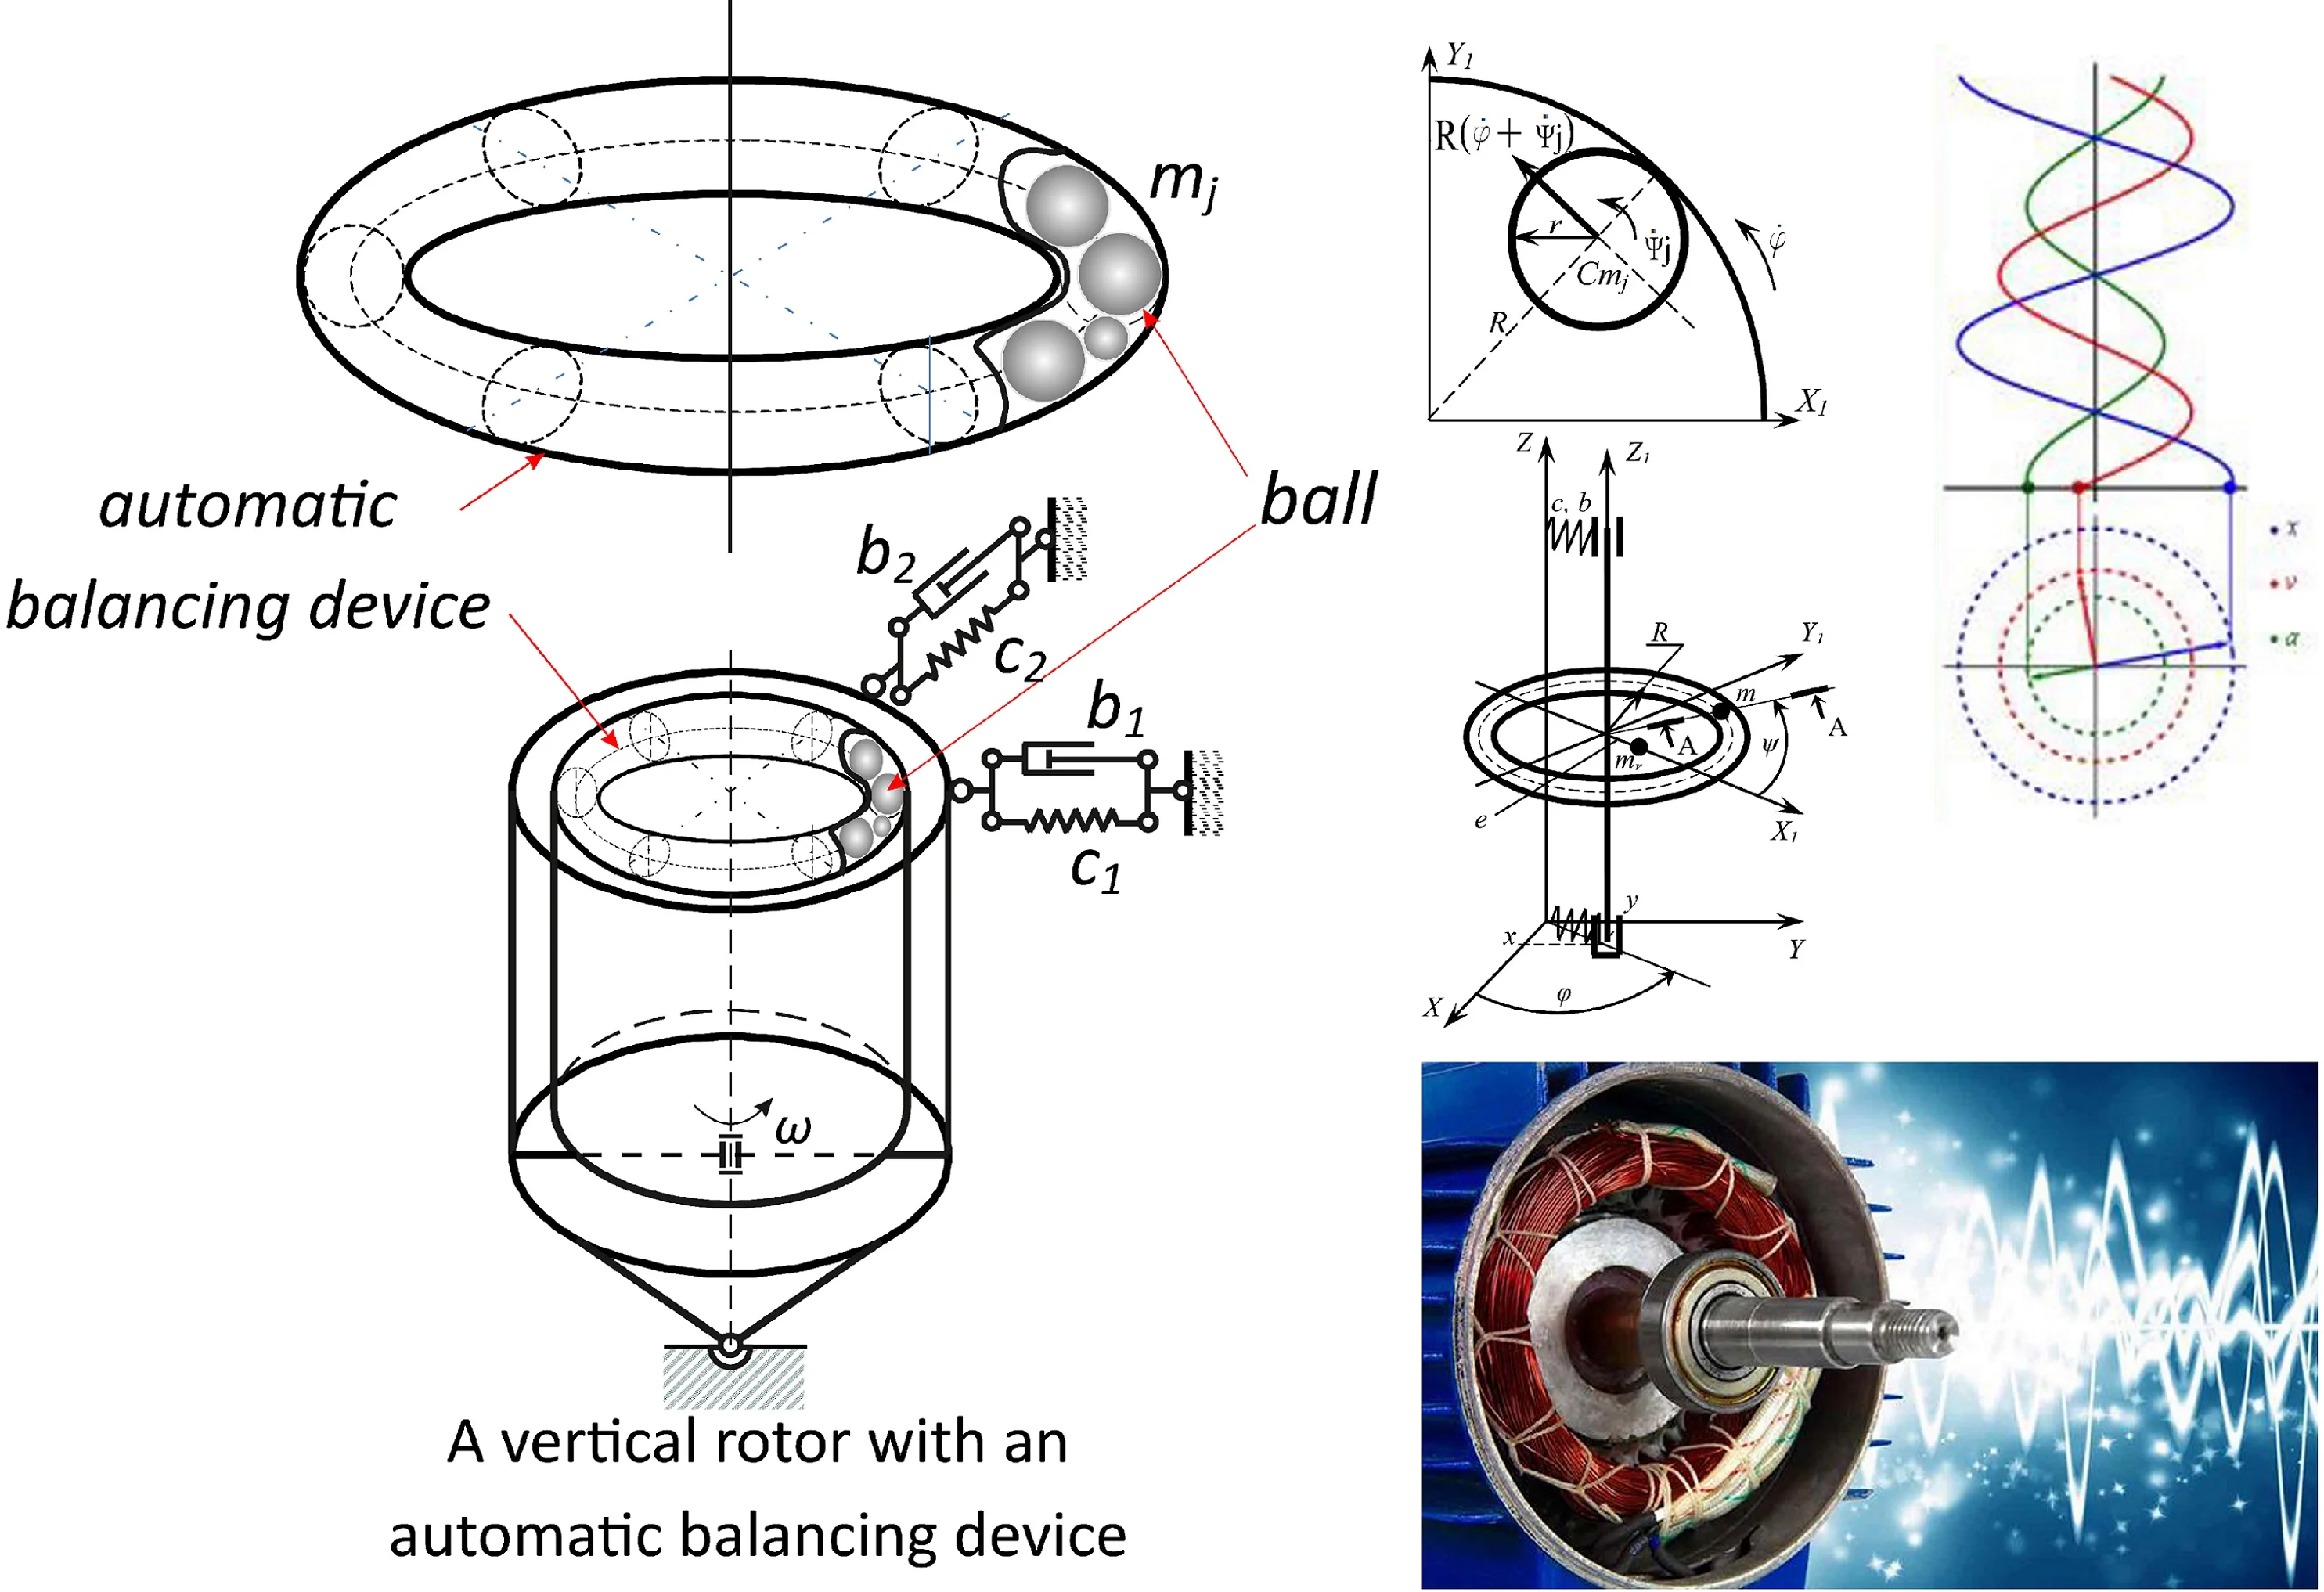 Modelling of transient and steady-state modes of a vertical rotor with an automatic balancing device